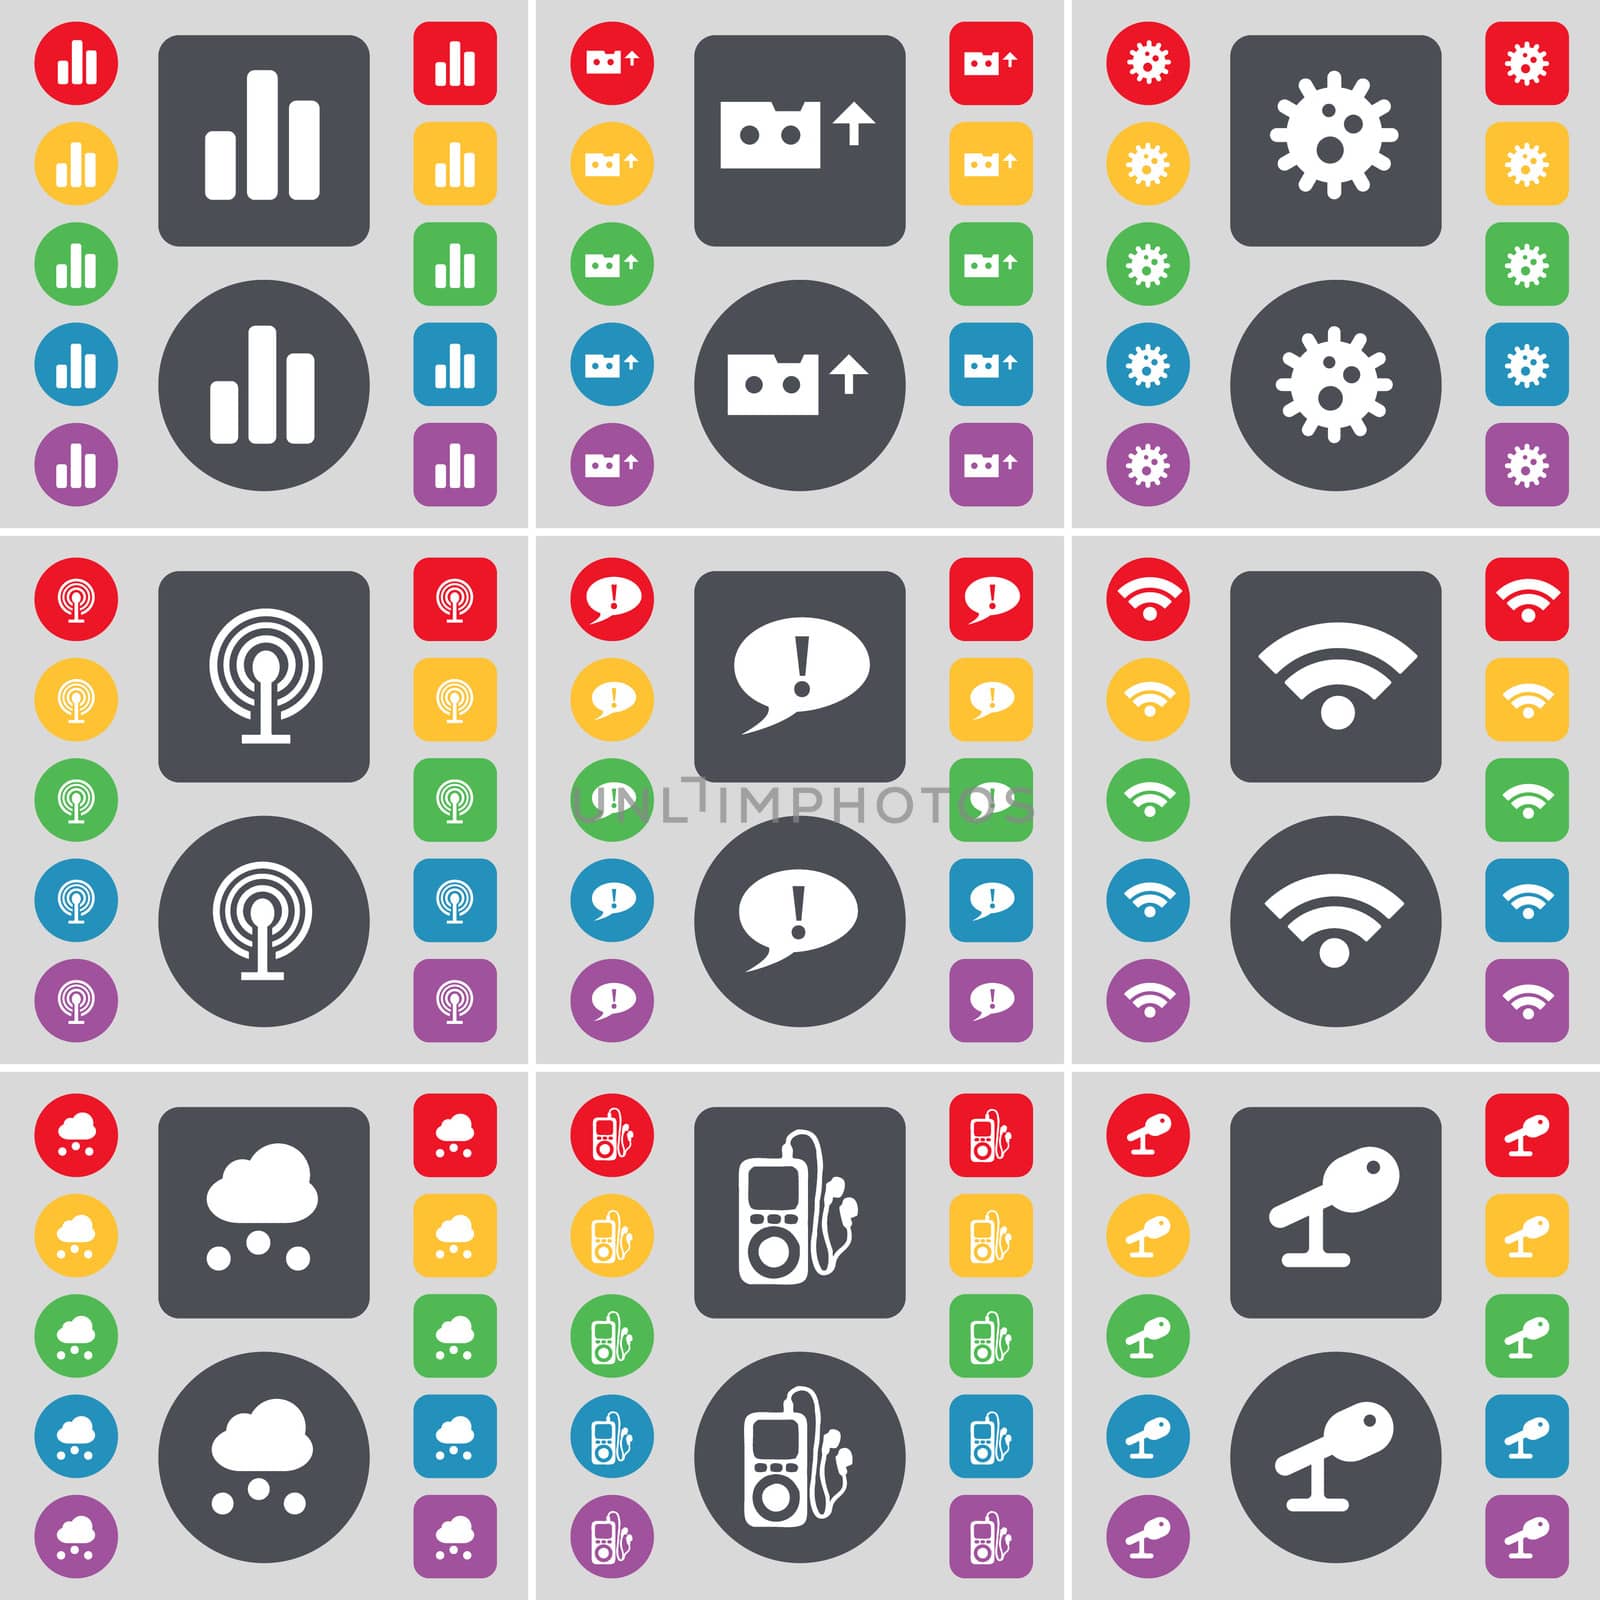 Diagram, Cassette, Gear, Wi-Fi, Chat bubble, Wi-Fi, Cloud, MP3 player, Microphone icon symbol. A large set of flat, colored buttons for your design. illustration